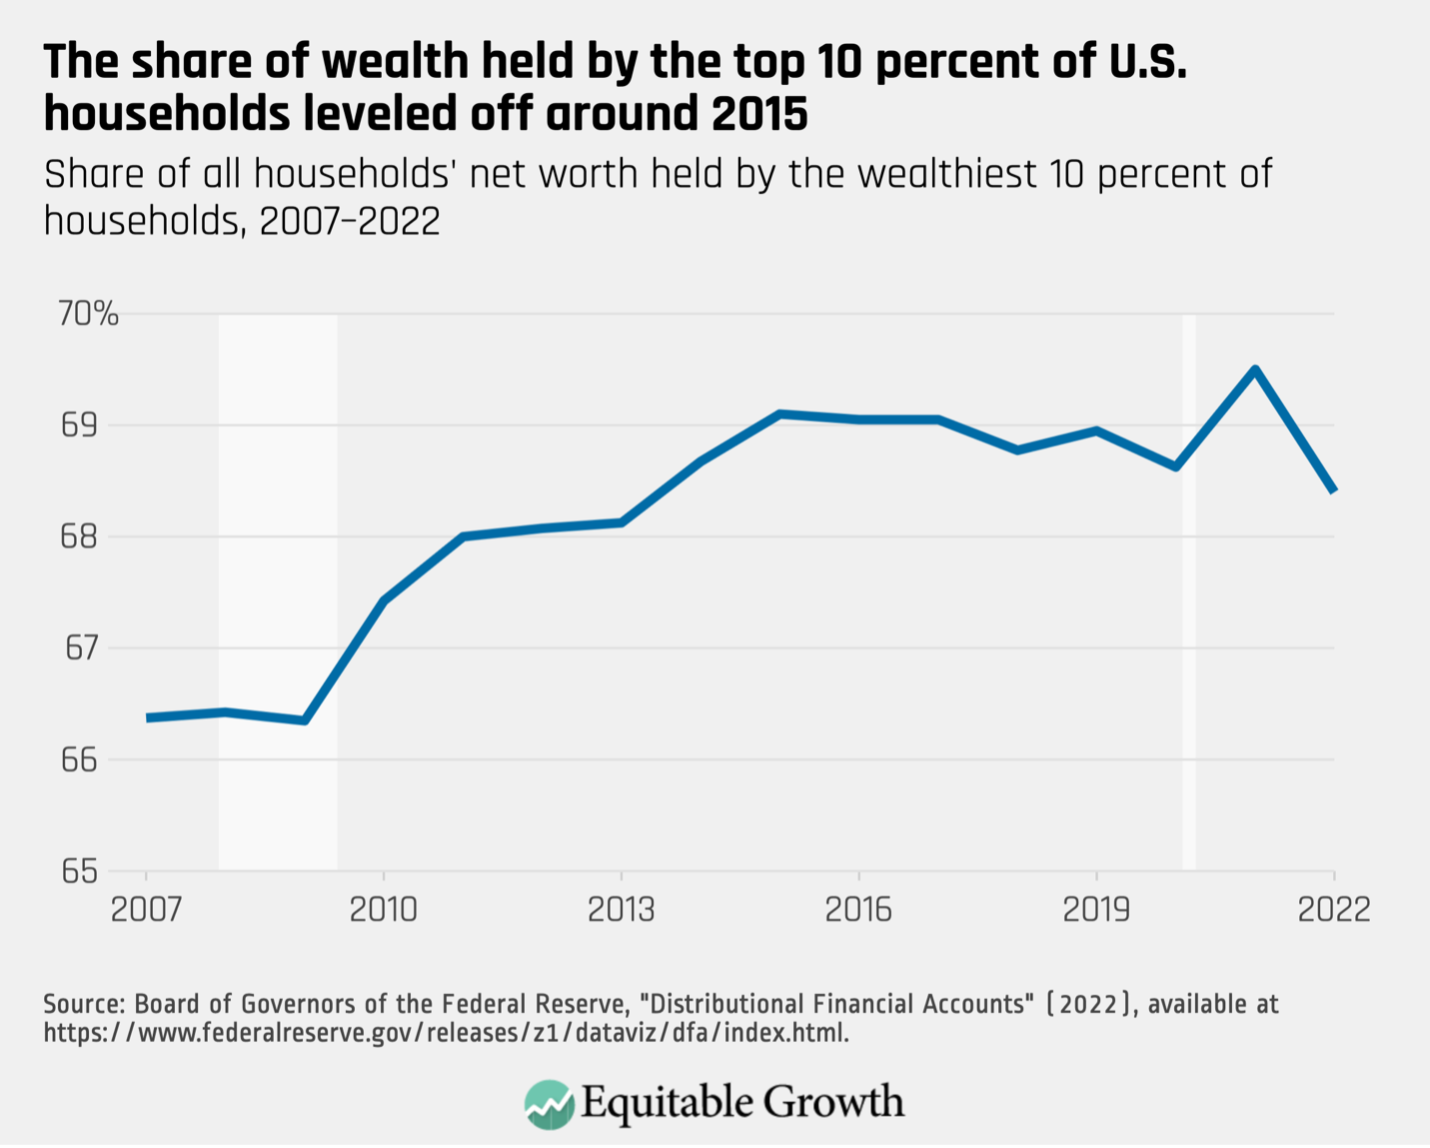 U.S. and wealth inequality are no longer increasing, but a